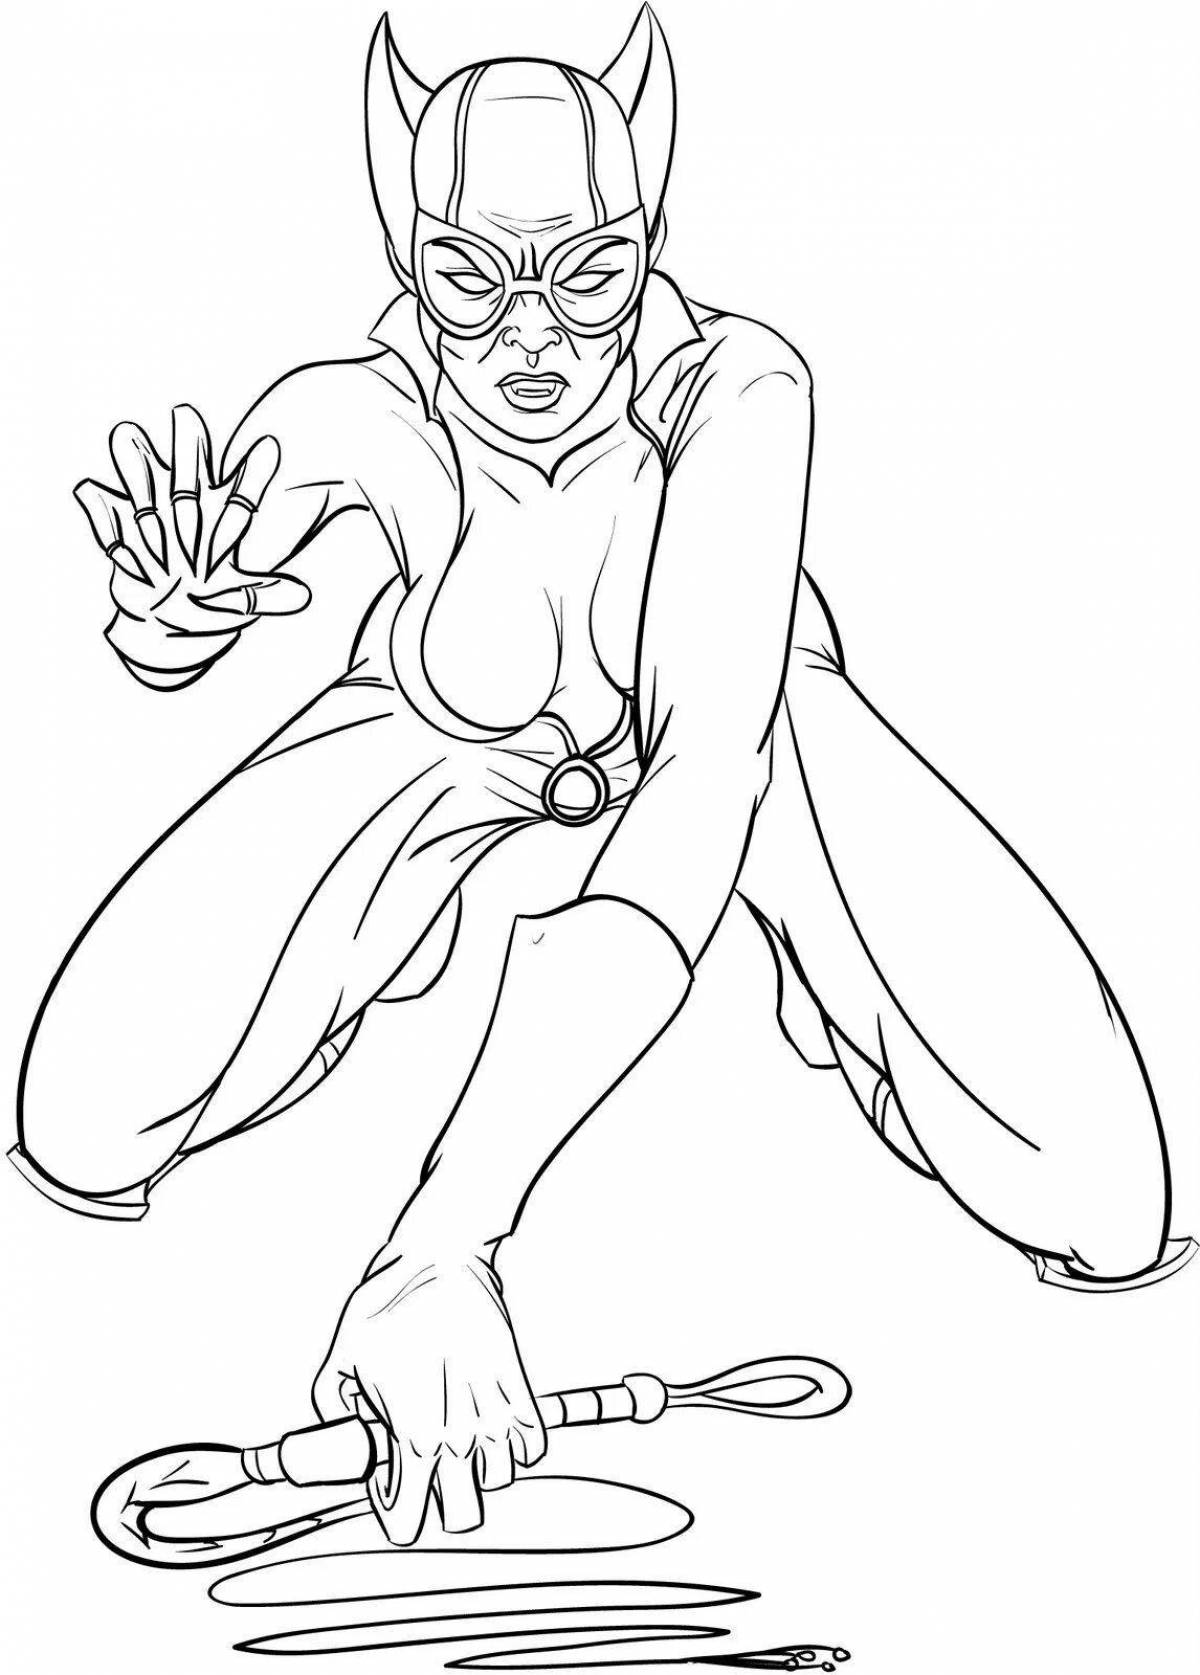 Colorful cat lady coloring page